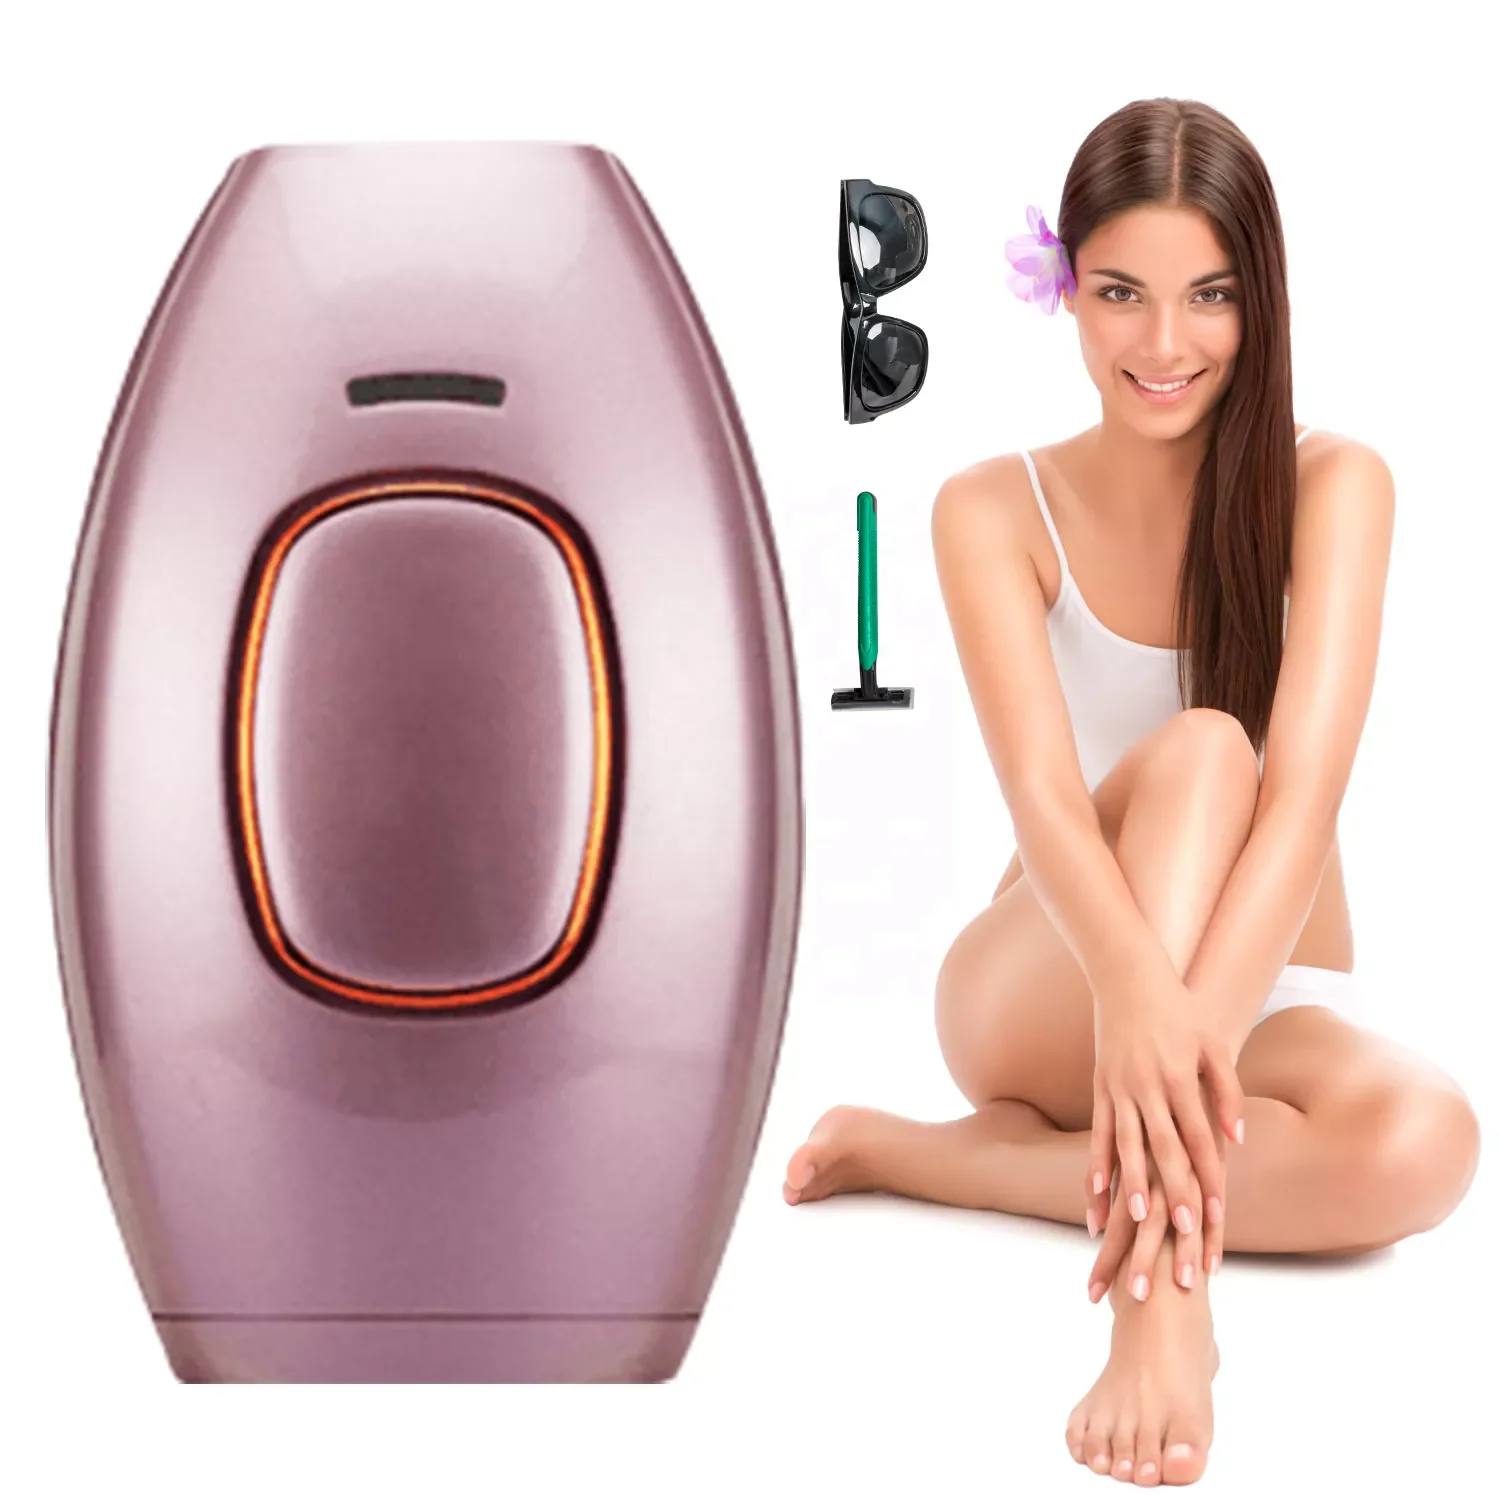 New Arrivals 3 In 1 Home Use Beauty Equipment Ipl Hair Removal Painless  Hair Removal Device Laser Hair Removal At Home - Buy New Arrivals 3 In 1  Home Use Beauty Equipment,Ipl